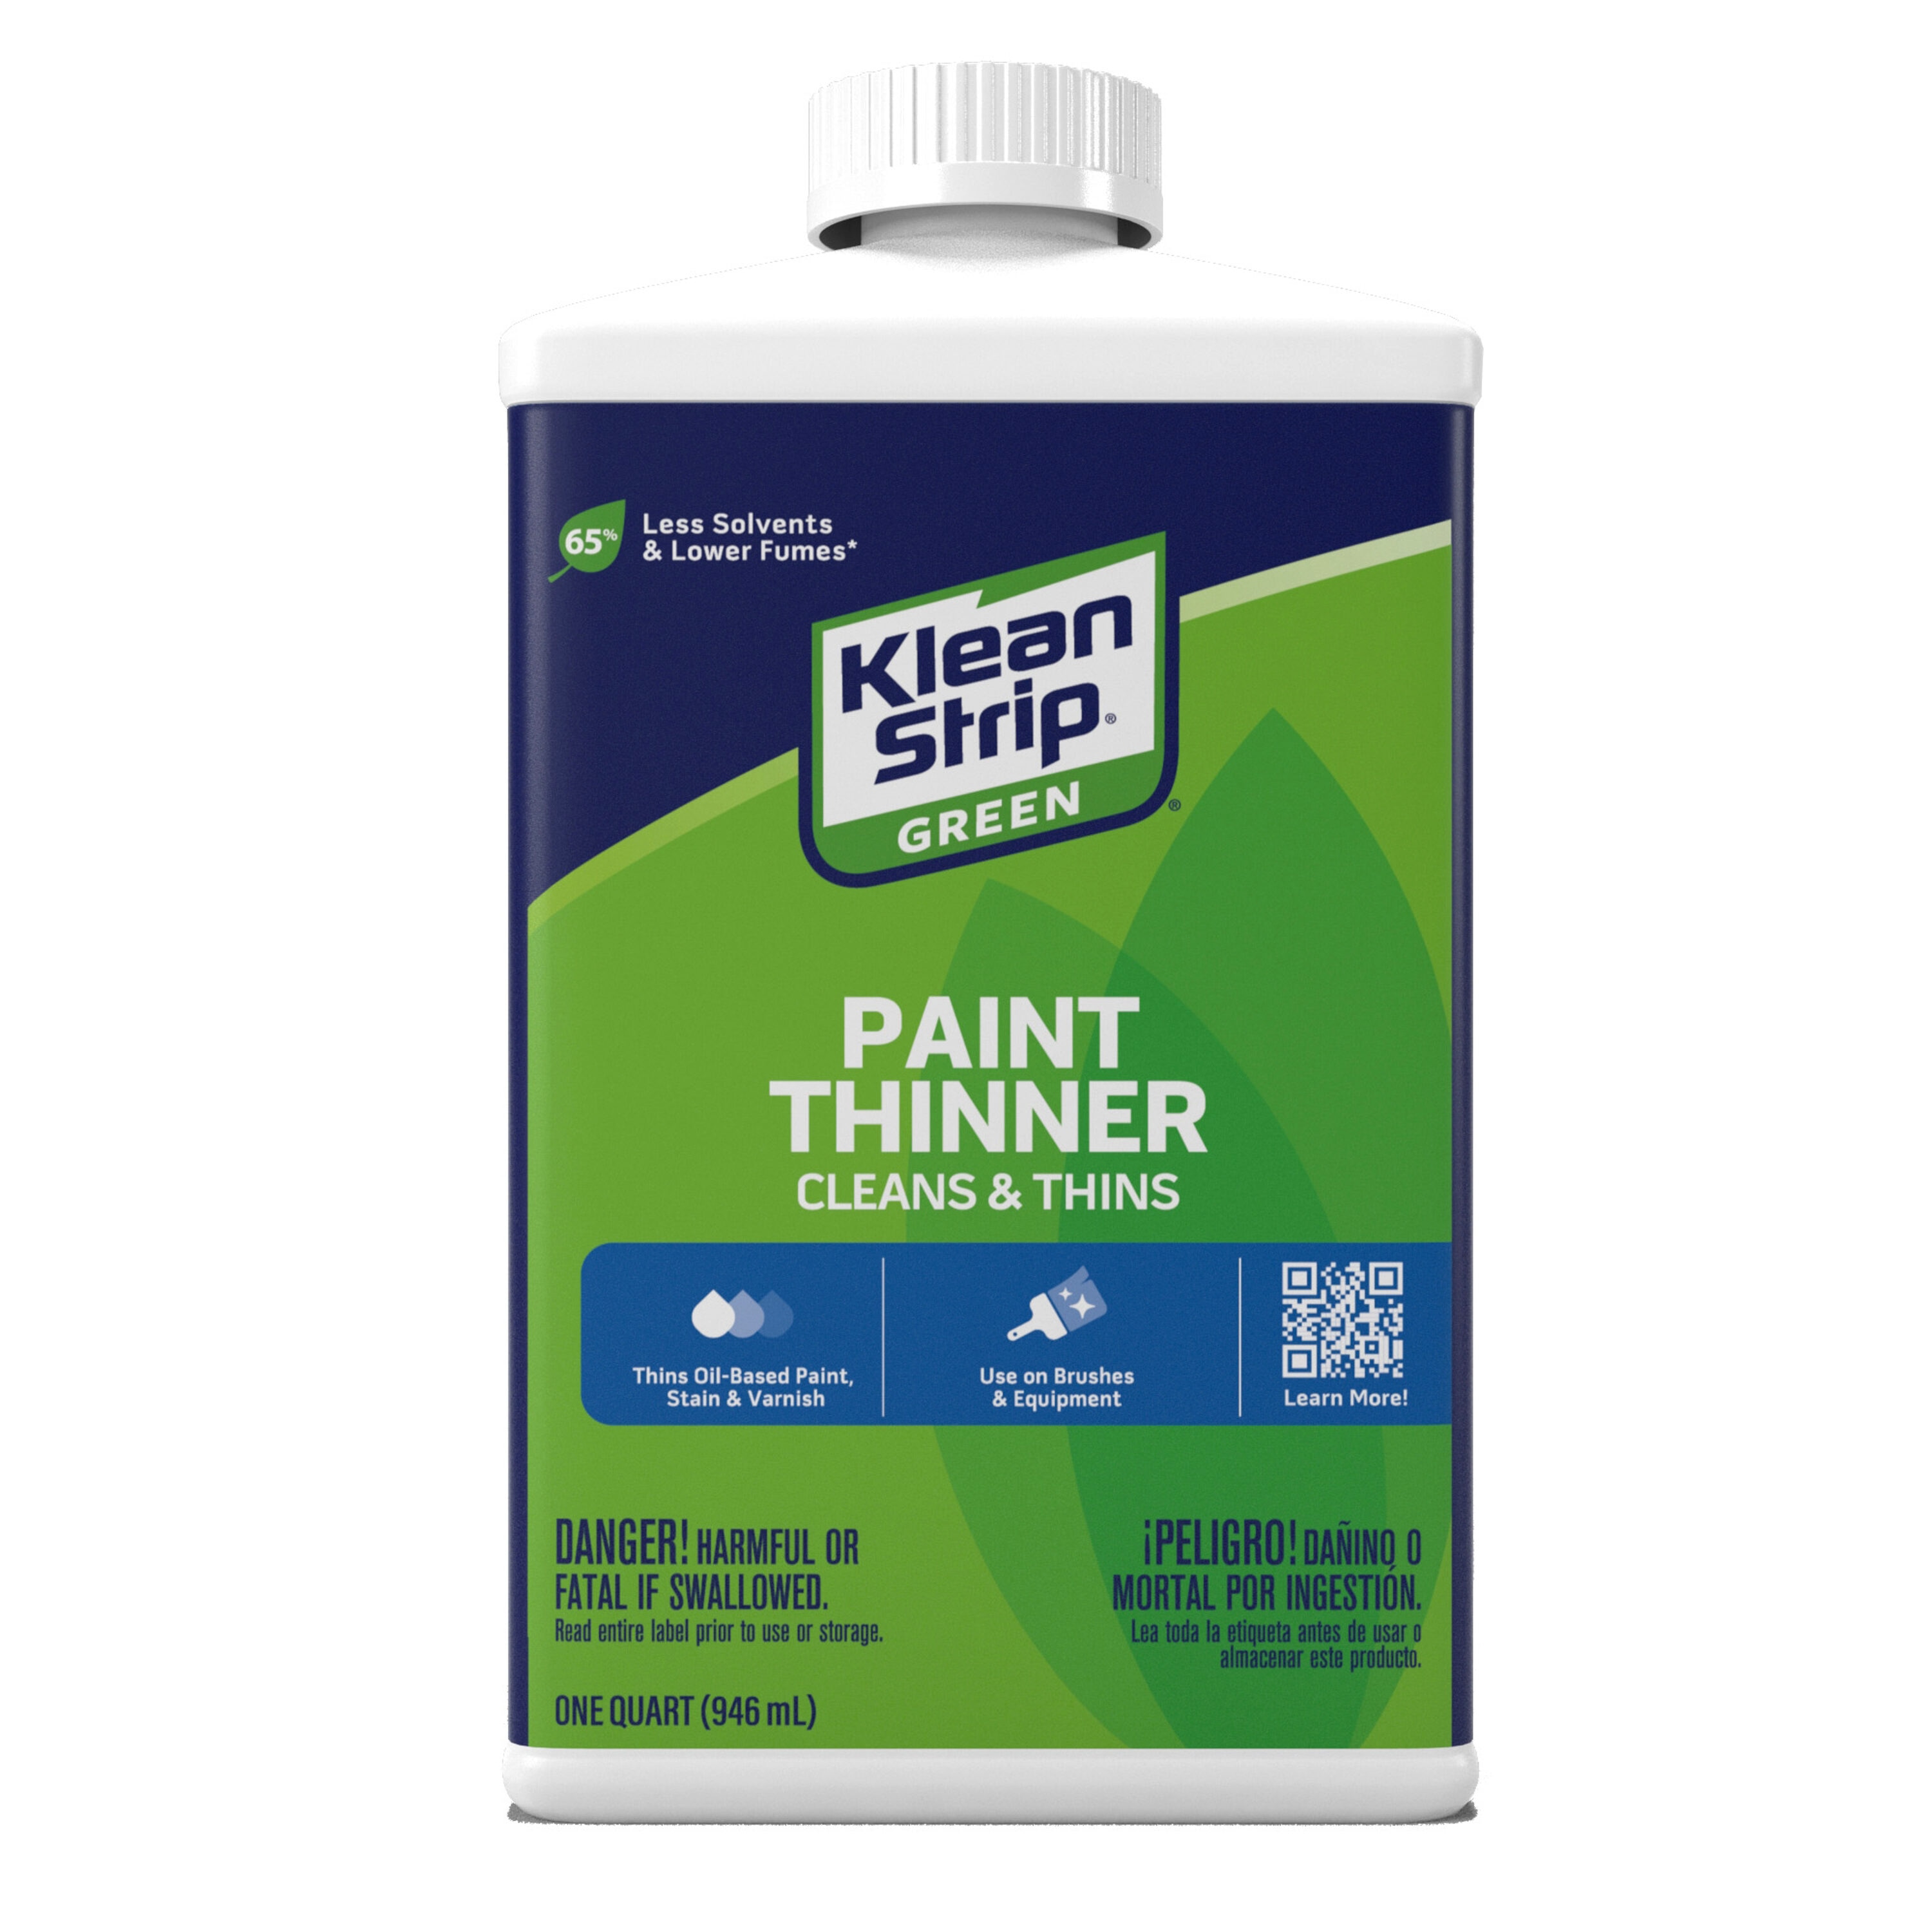 Jasco 32-fl oz Slow to dissolve Paint thinner in the Paint